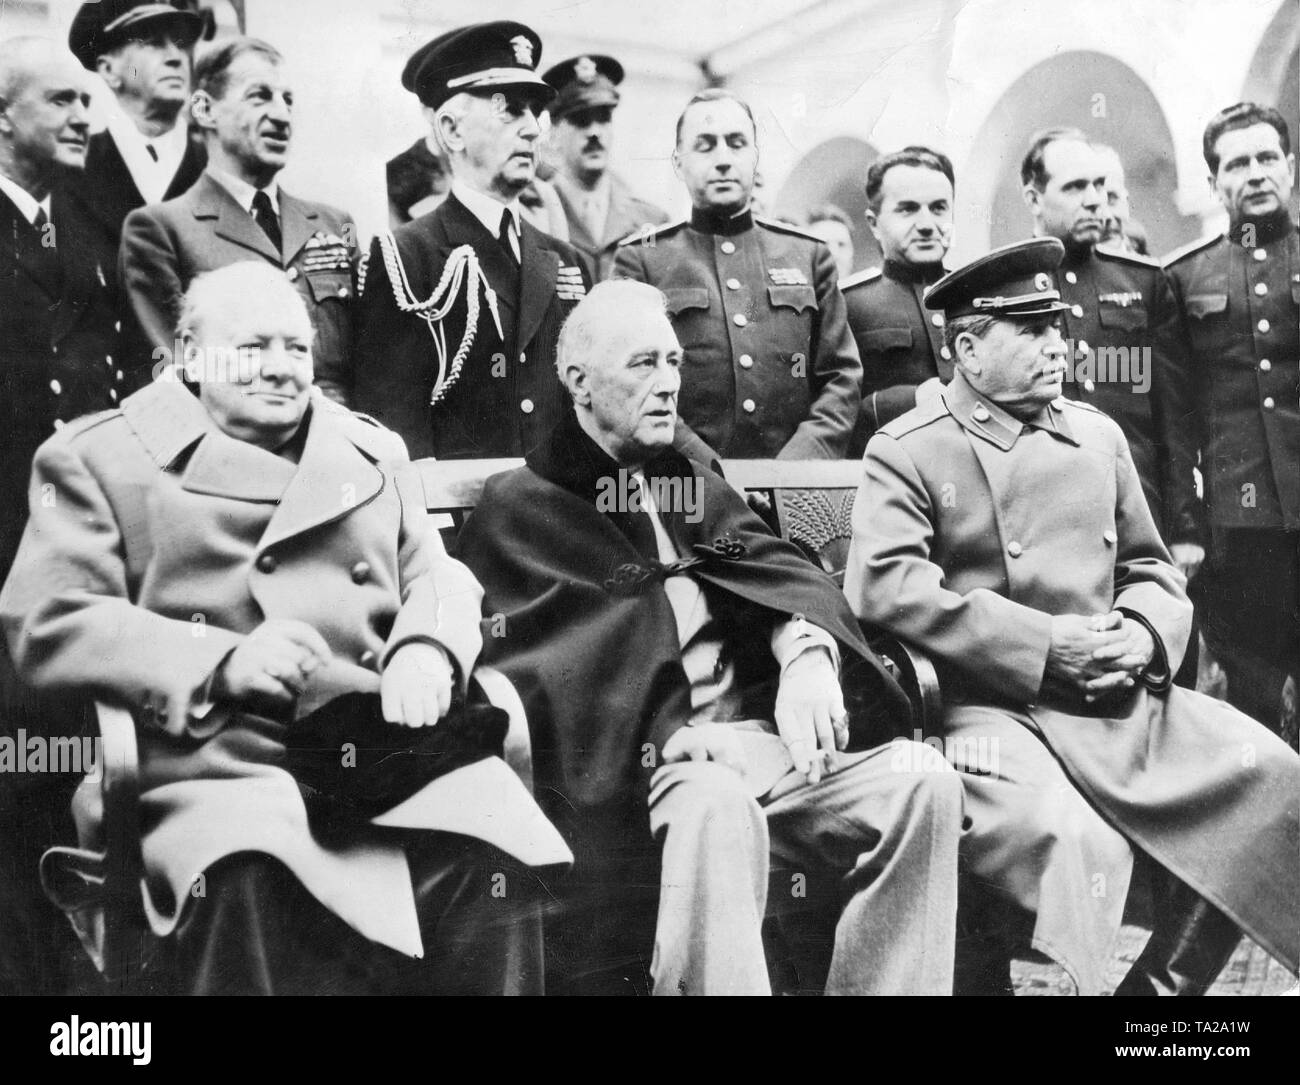 The Yalta Conference: the British Prime Minister Winston Churchill, the American President Franklin D. Roosevelt and Joseph Stalin. Back row, from left.: Sir Alan Cunningham, General Sir Hastings Ismay, Fleet Admiral E.J. King. Stock Photo